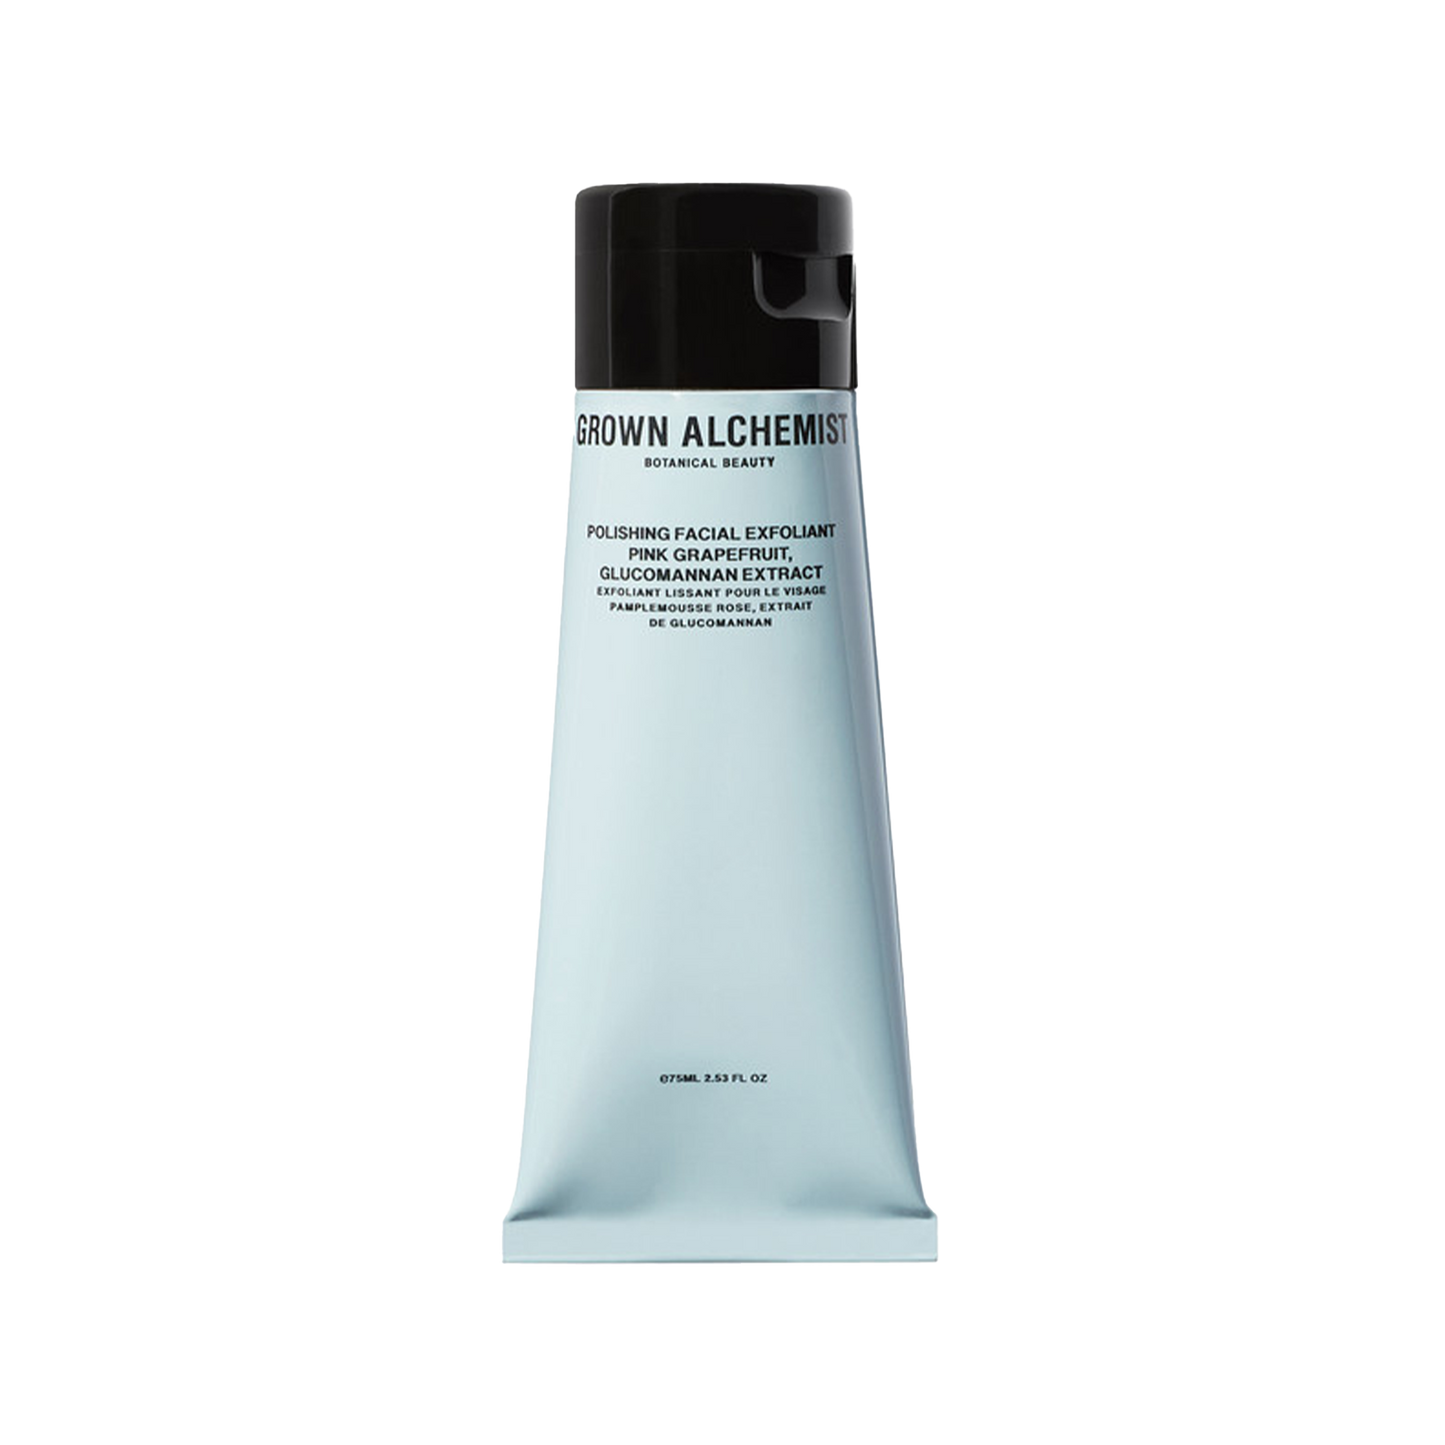 Grown Alchemist Polishing Facial Exfoliant: A gentle skin-polishing exfoliant formulated for daily use, to gently delaminate dead skin cells and stimulate cell regeneration. Facial skin is left looking radiant, and smooth, perfectly prepared for moisturizing.